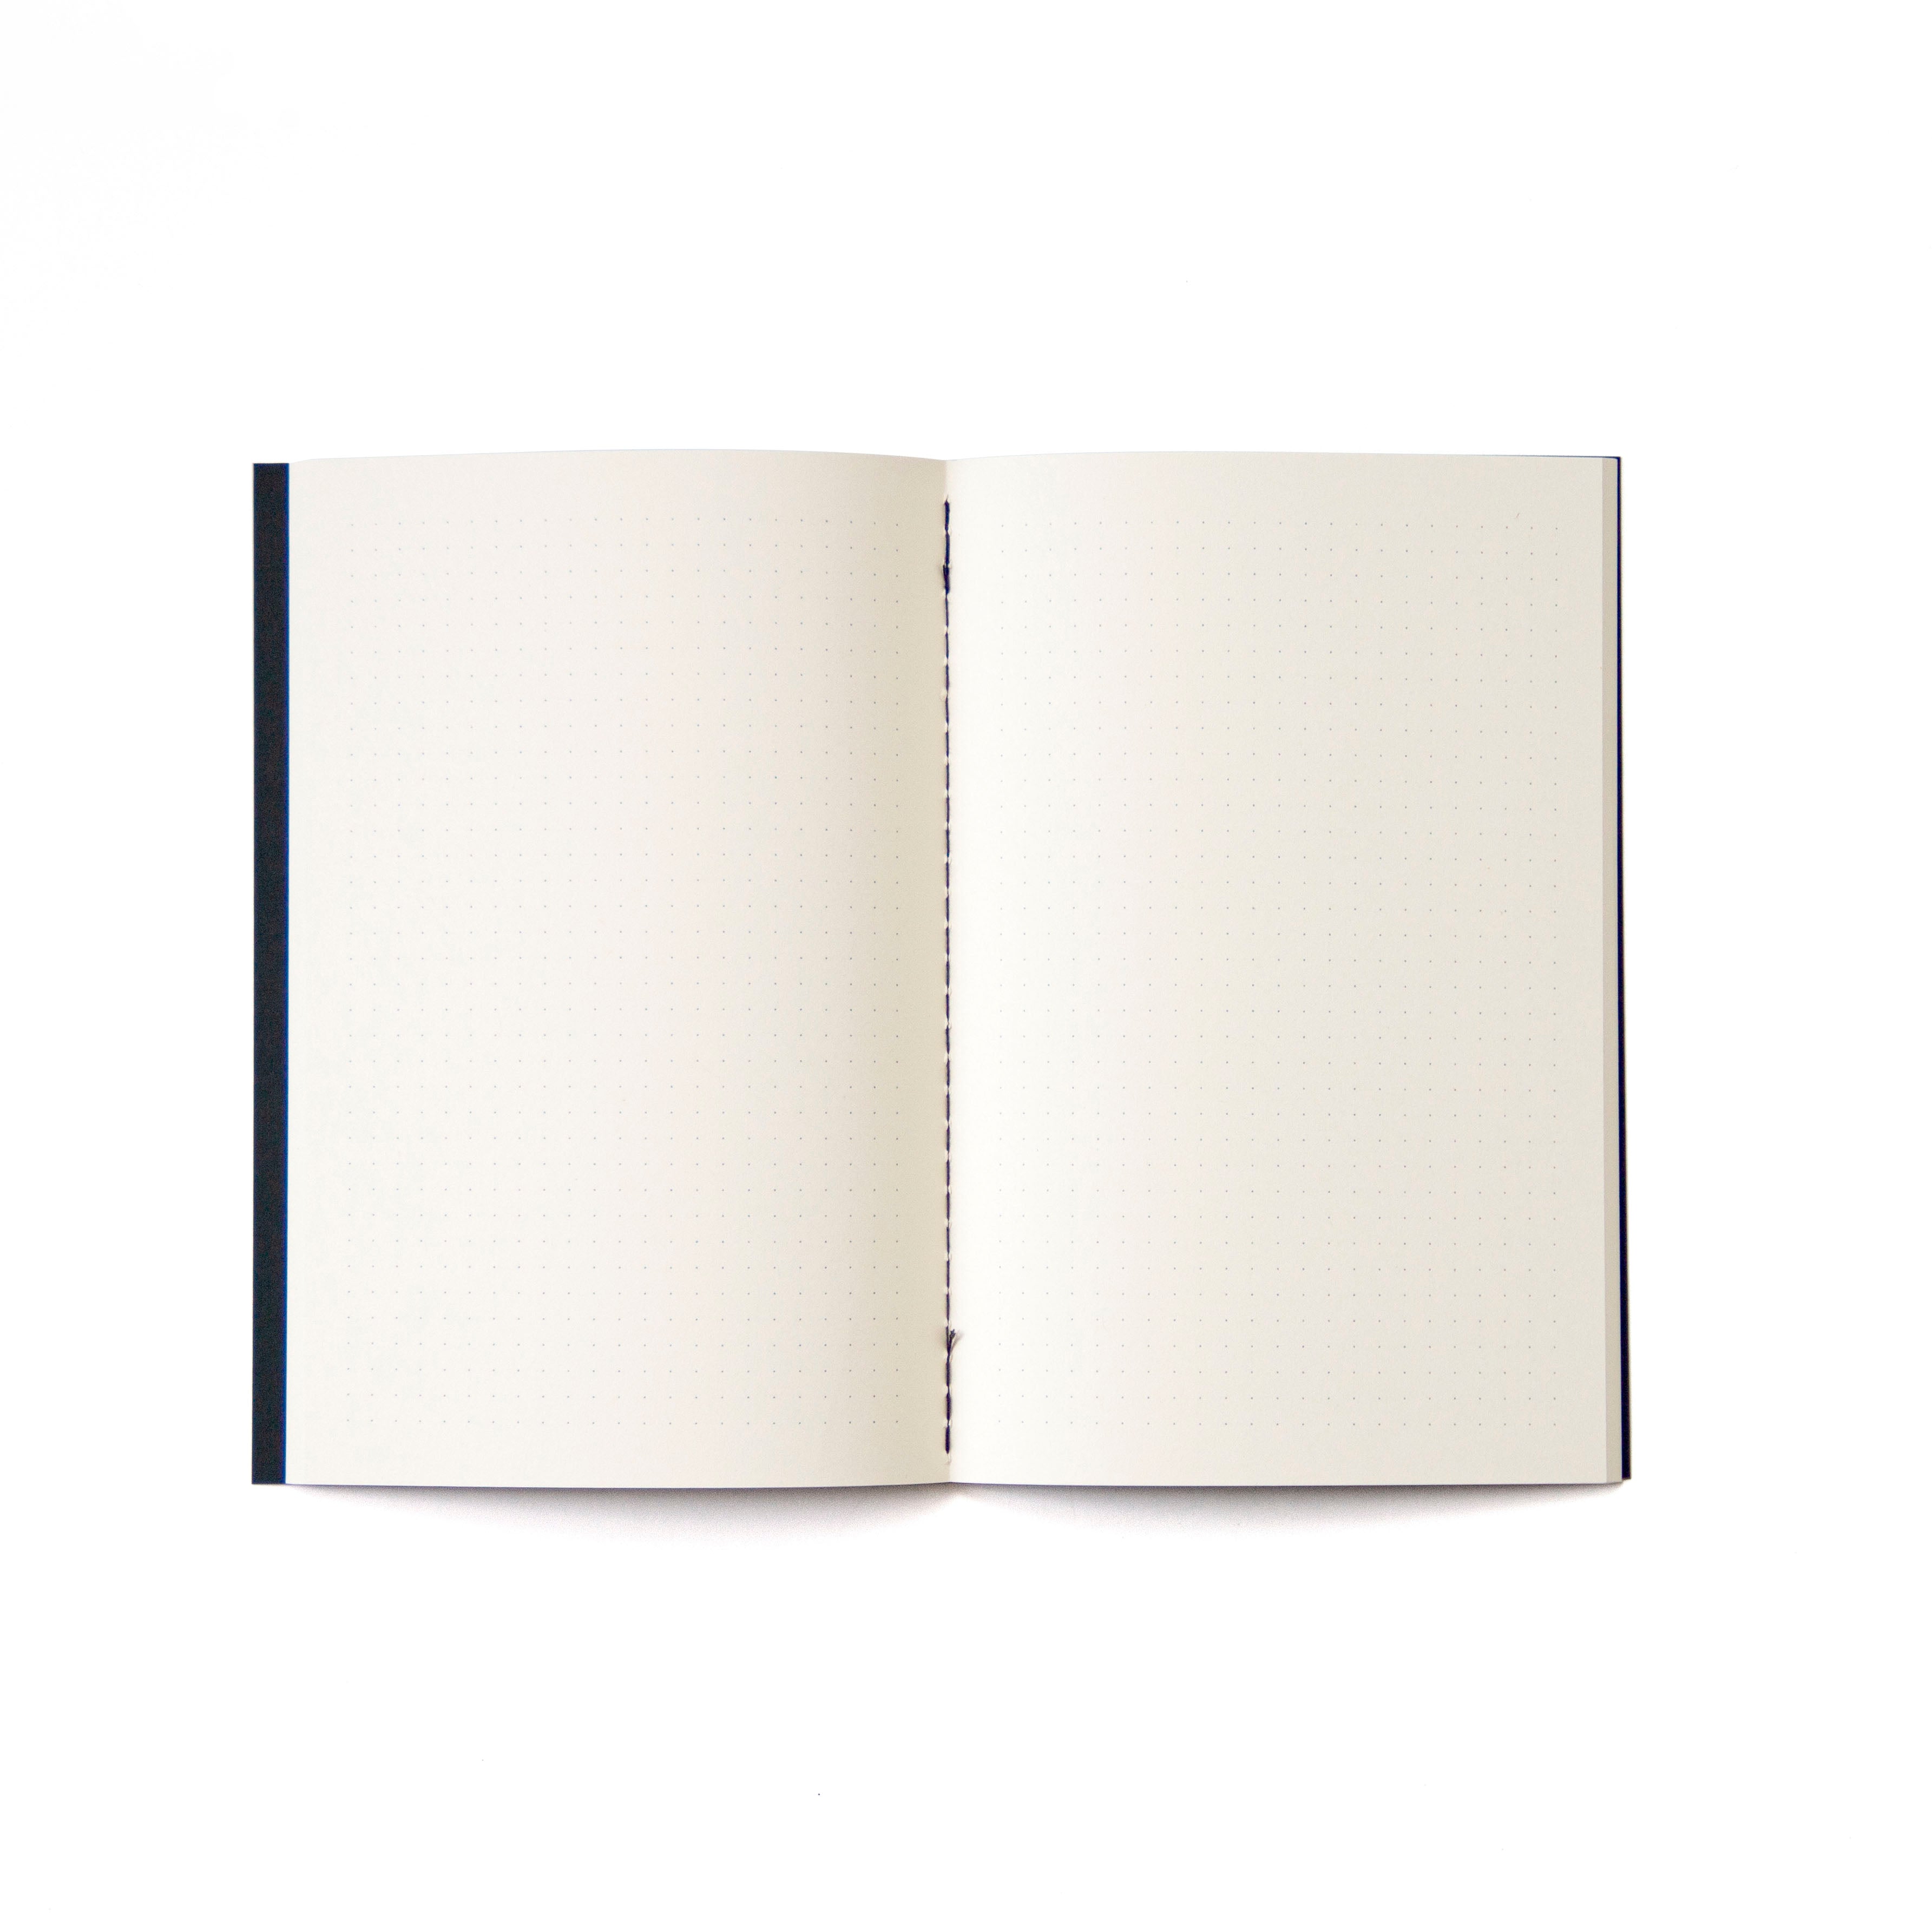 OCTÀGON DESIGN | Open "Black" dotted notebook. Binding with black thread.